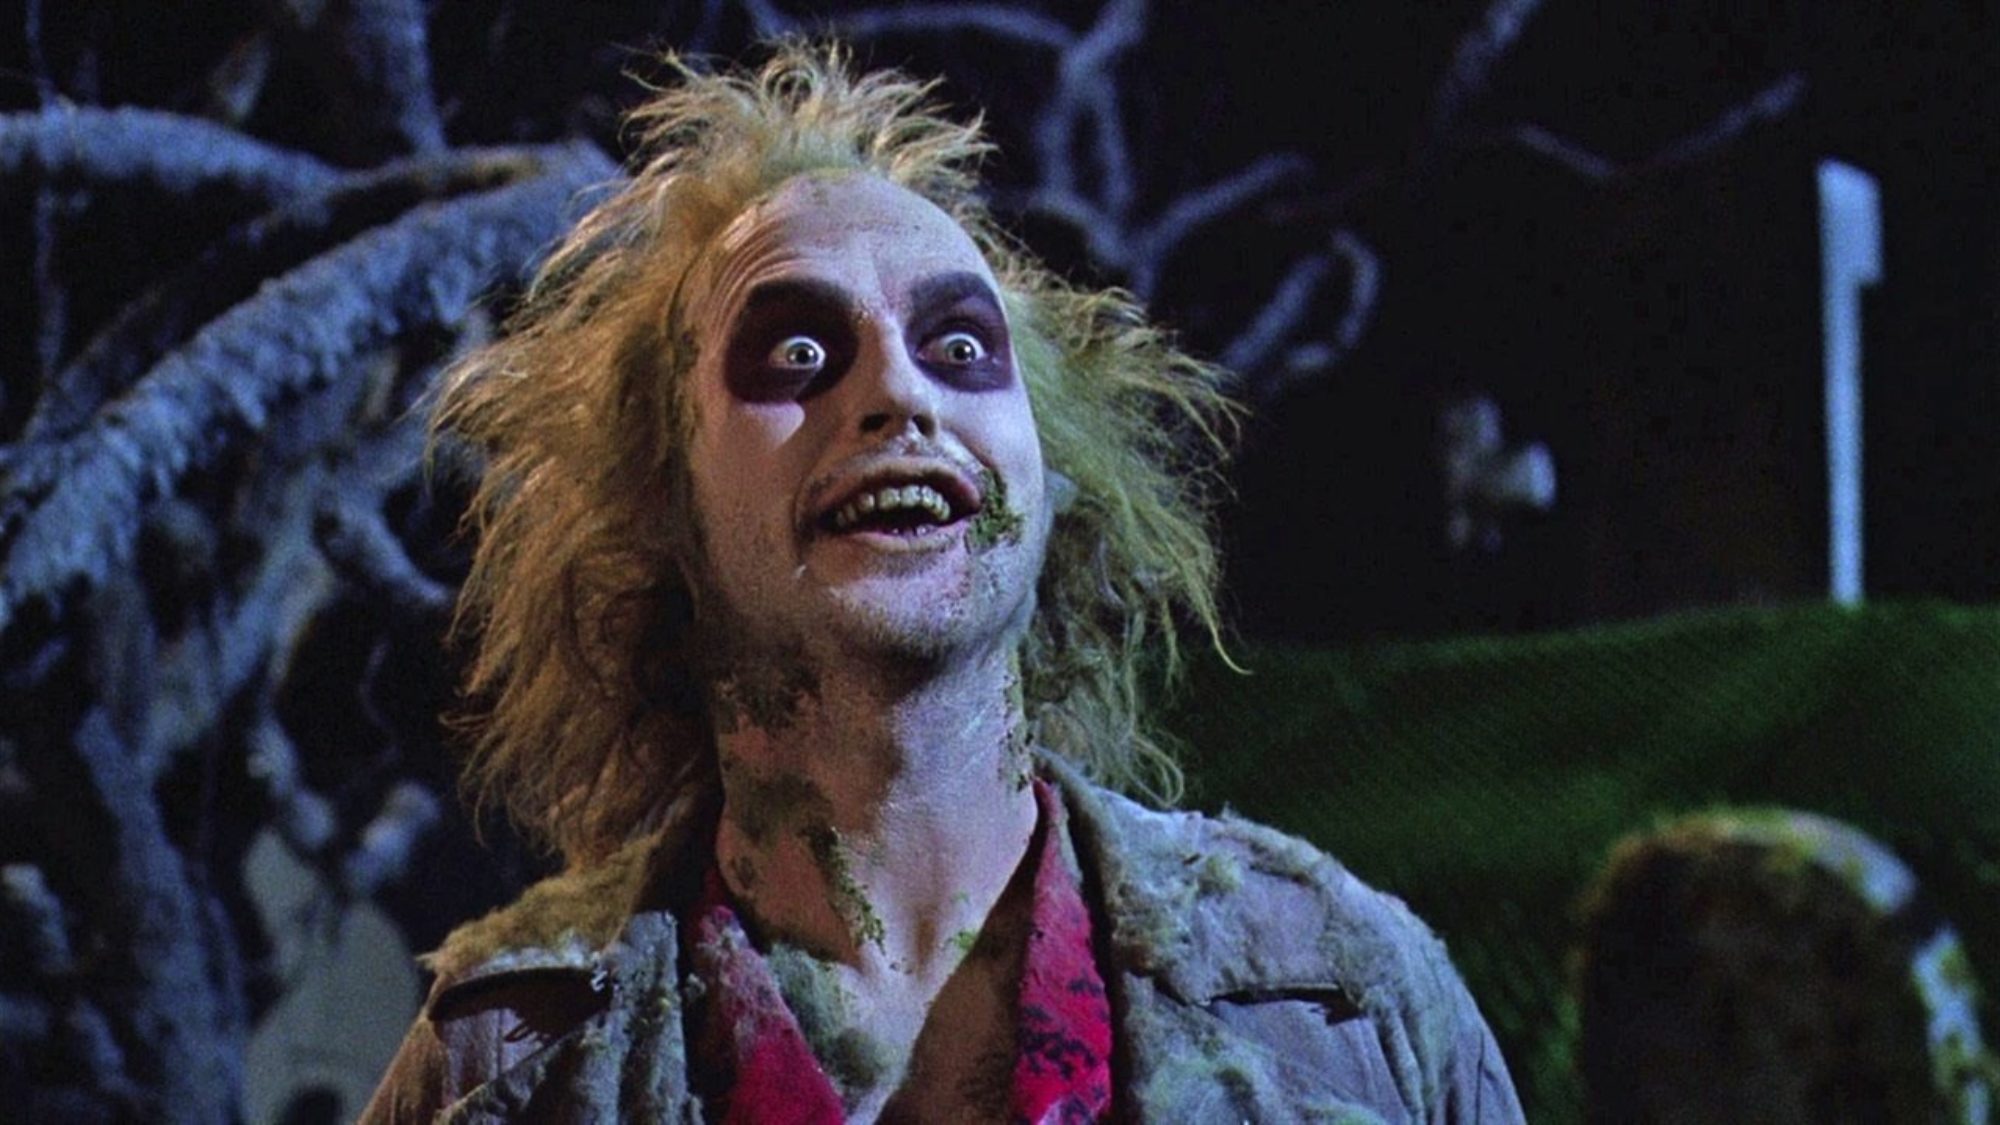 Why Beetlejuice 2's Old-School Effects are Stirring Buzz: Fans Debate CGI Choices in New Trailer